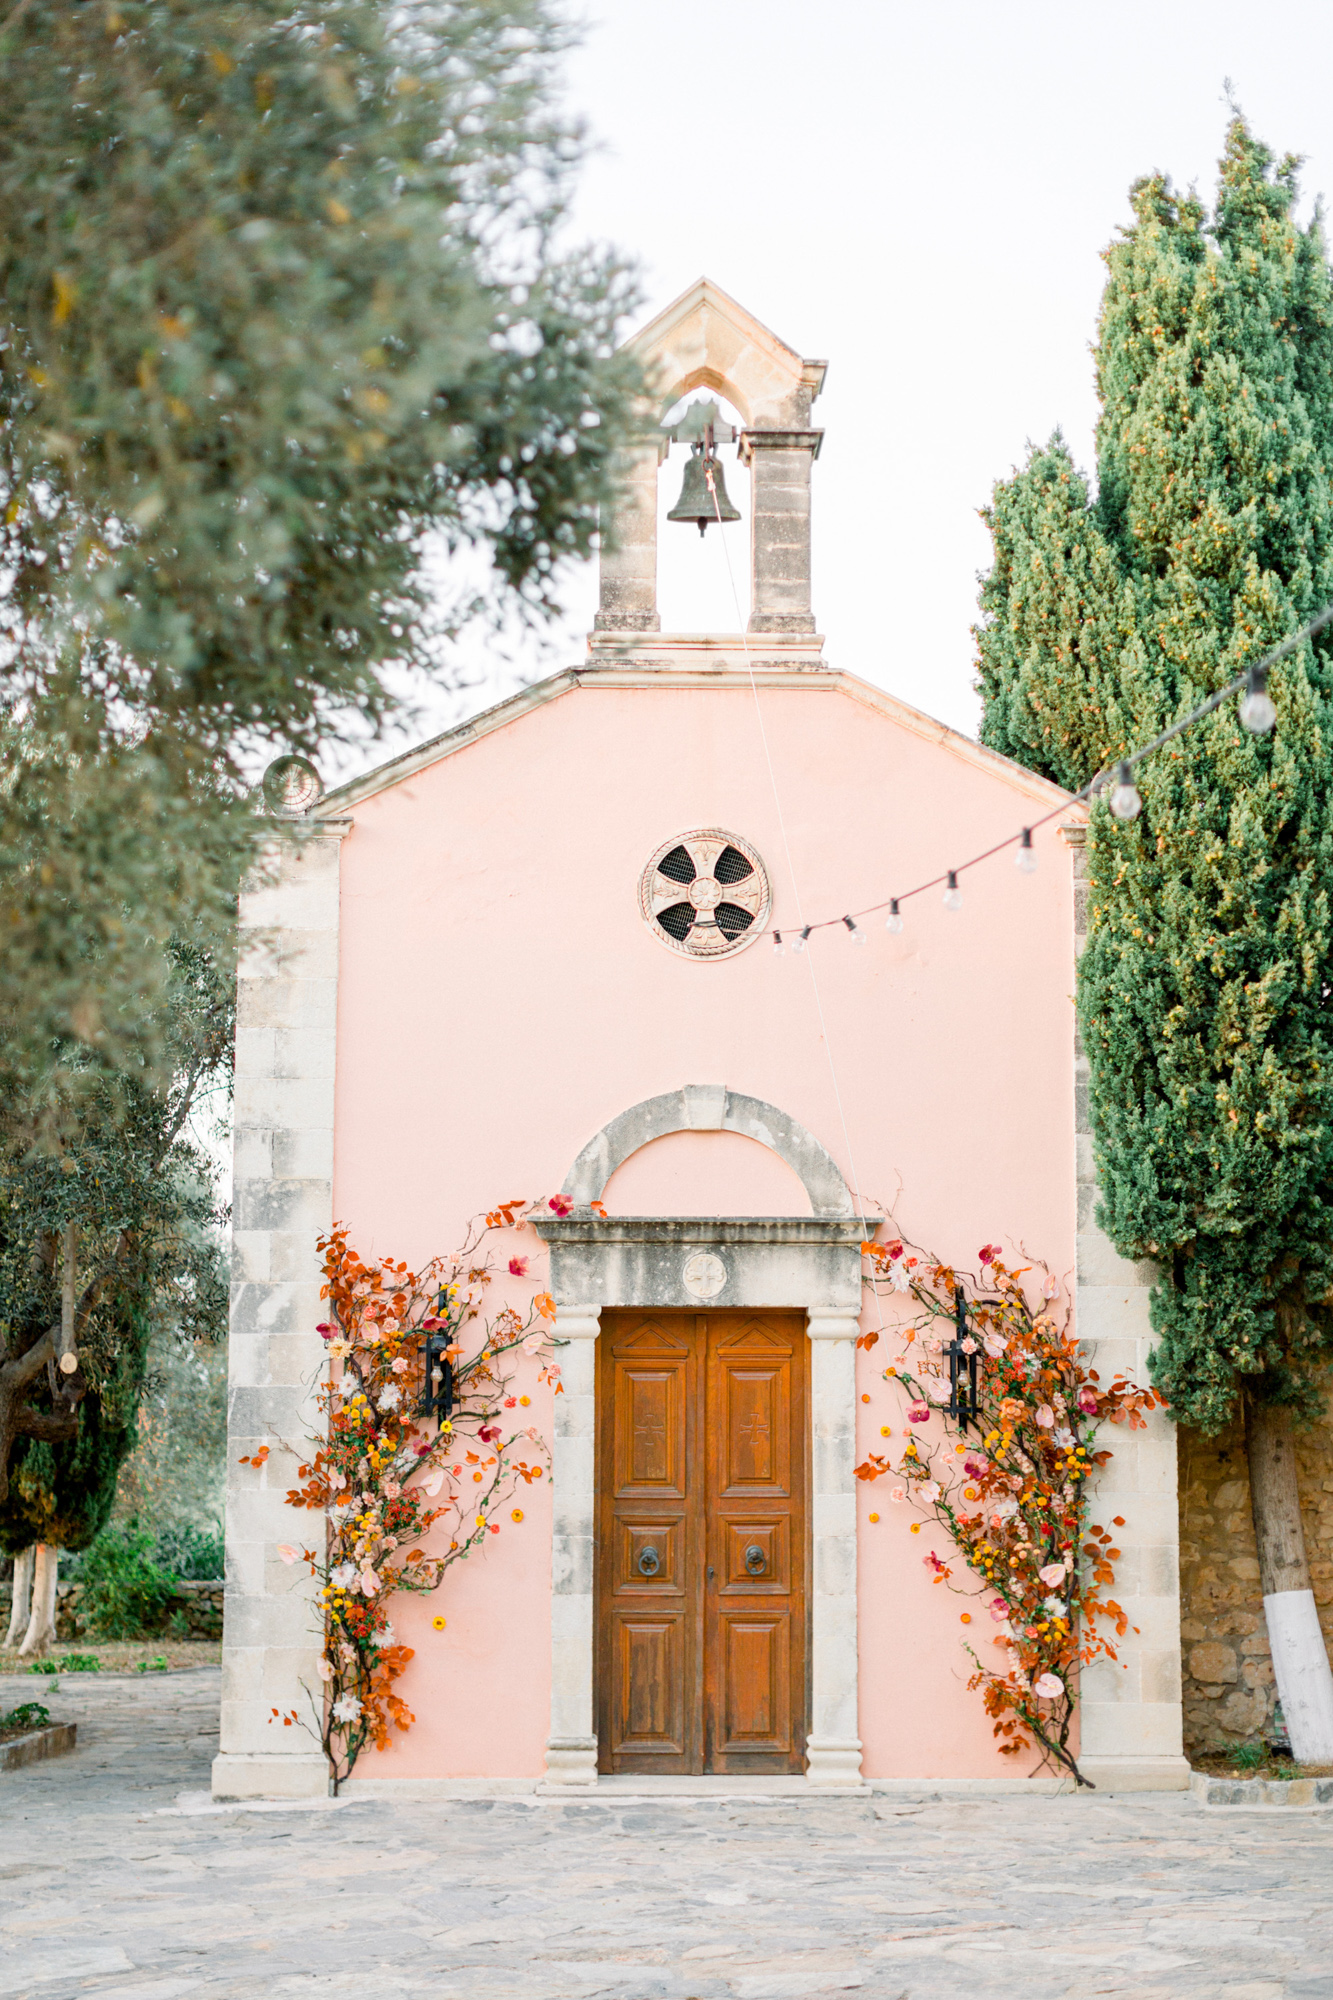 Wedding ceremony venue and decoration for a sunset wedding editorial in Grecotel Agreco Farms Crete Greece as published on Ruffled blog.